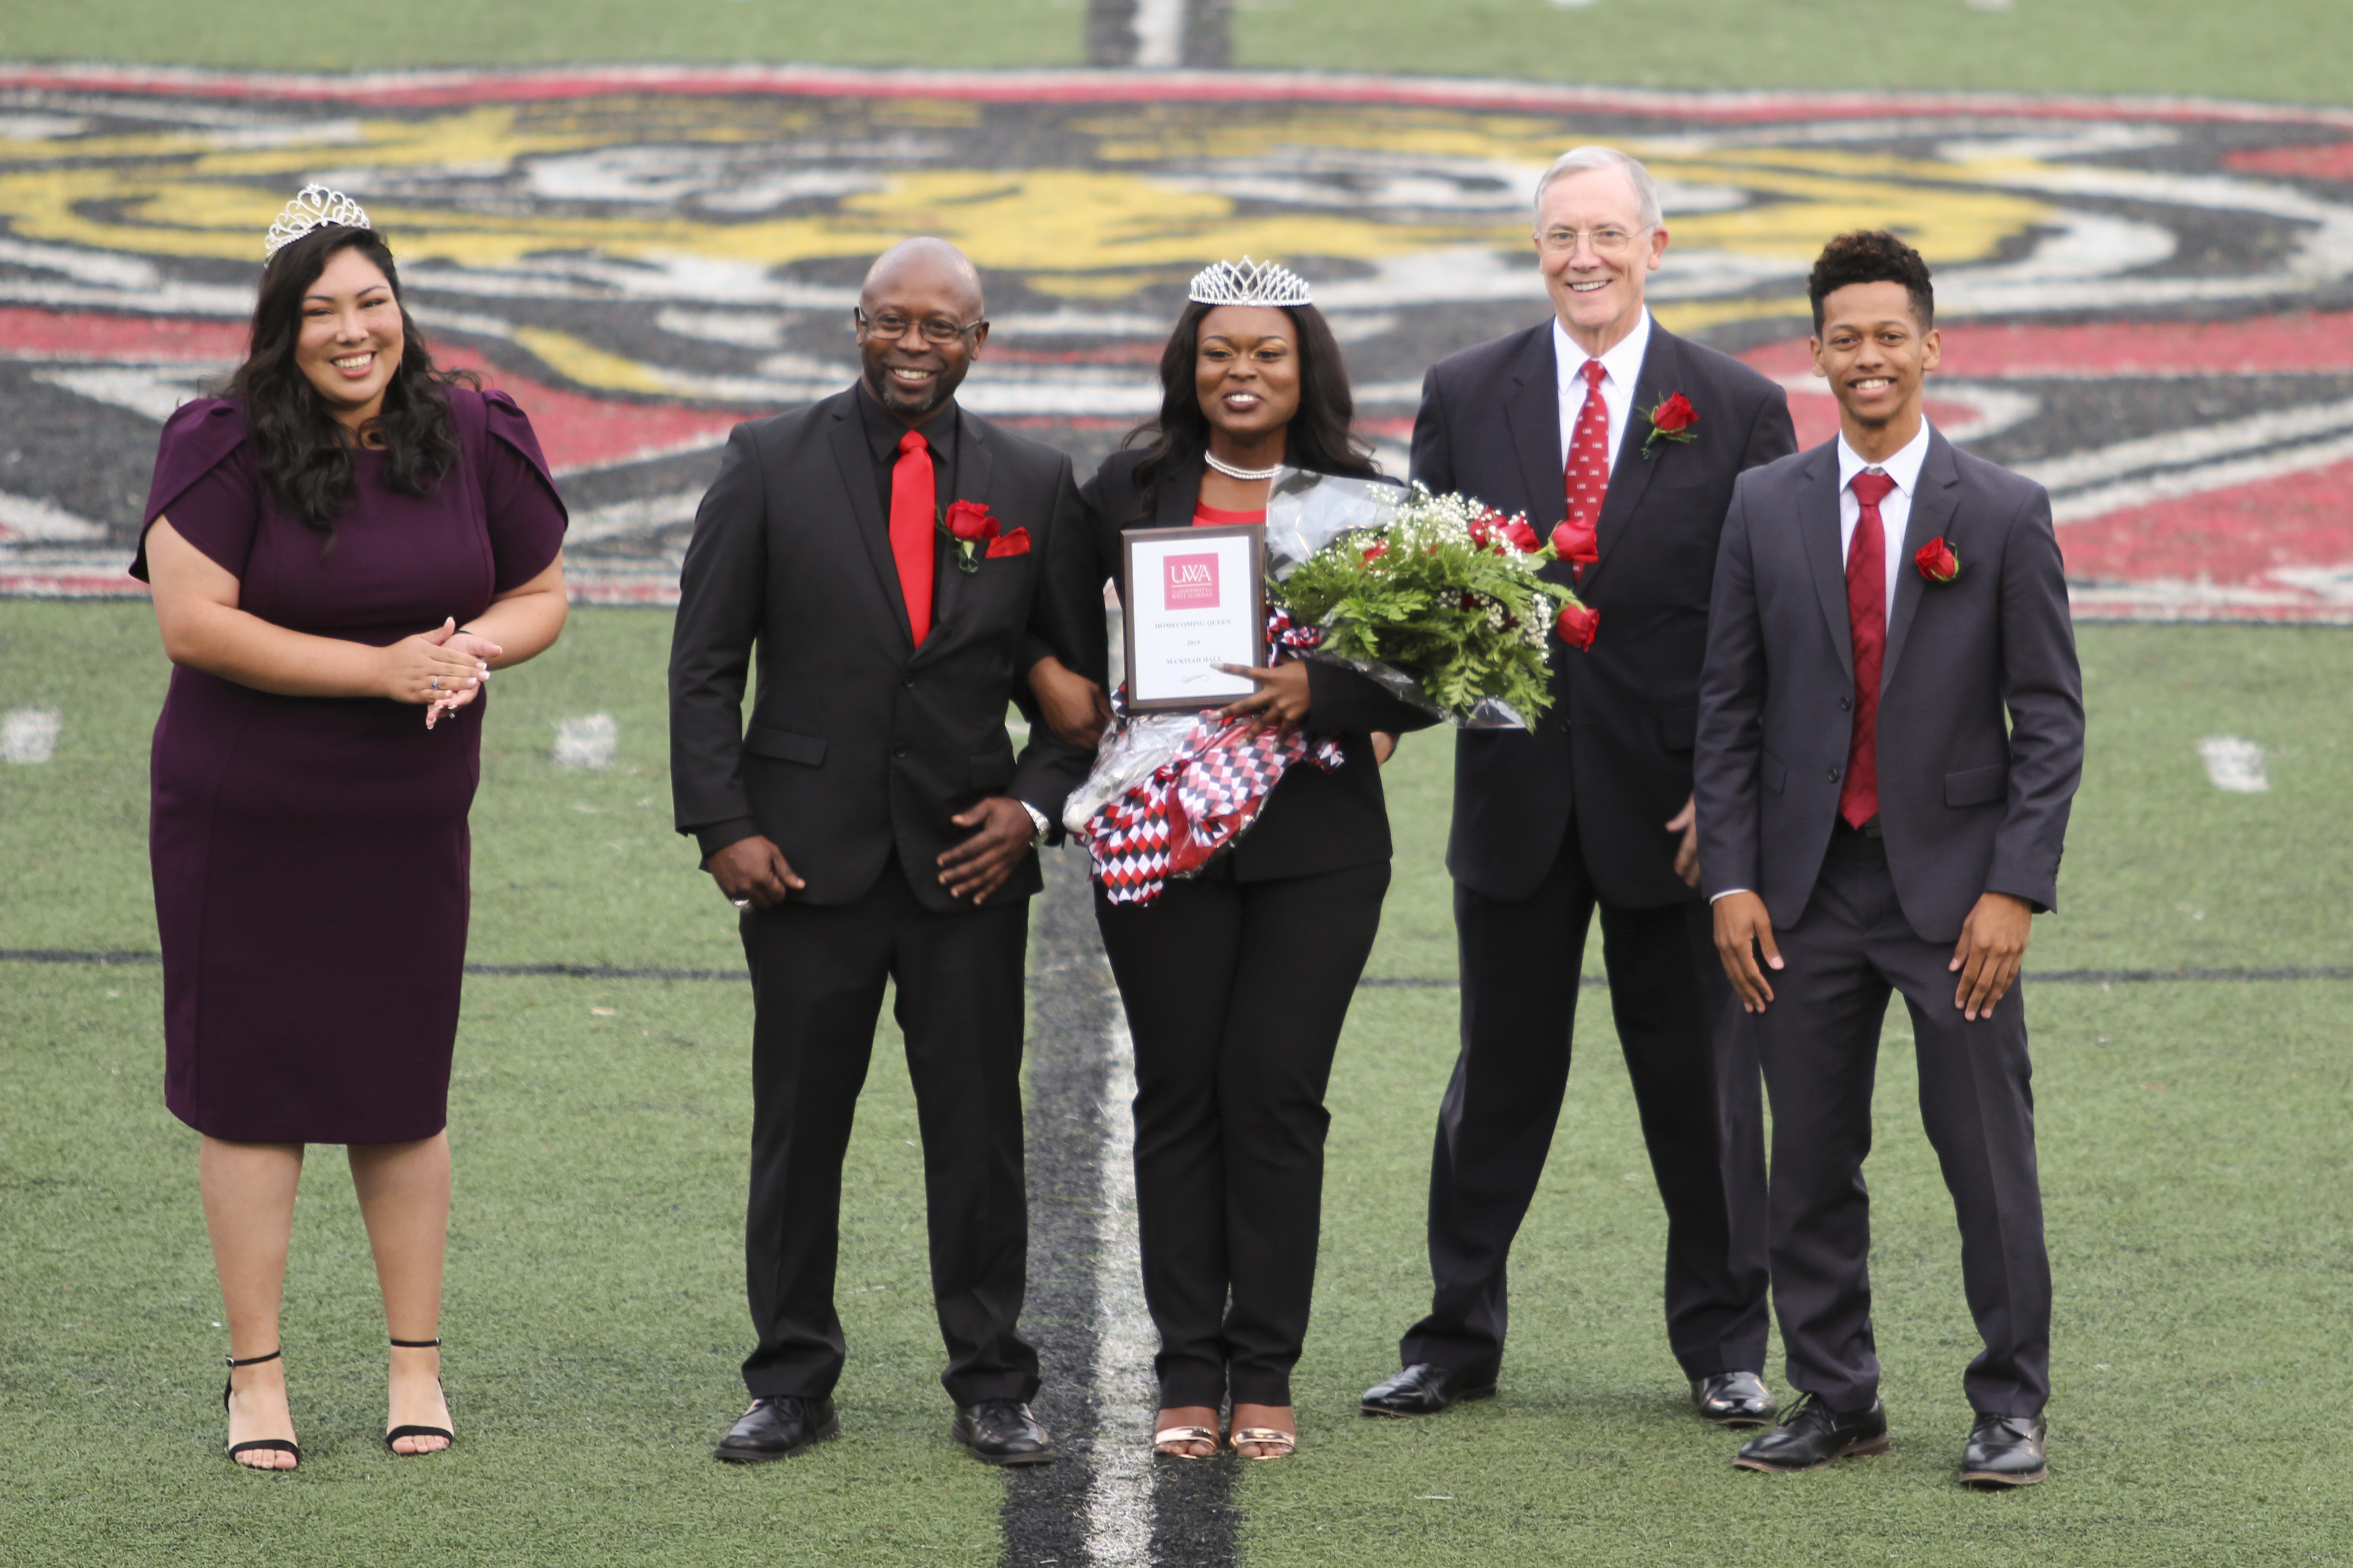 2019 Homecoming Queen Crowning on Field